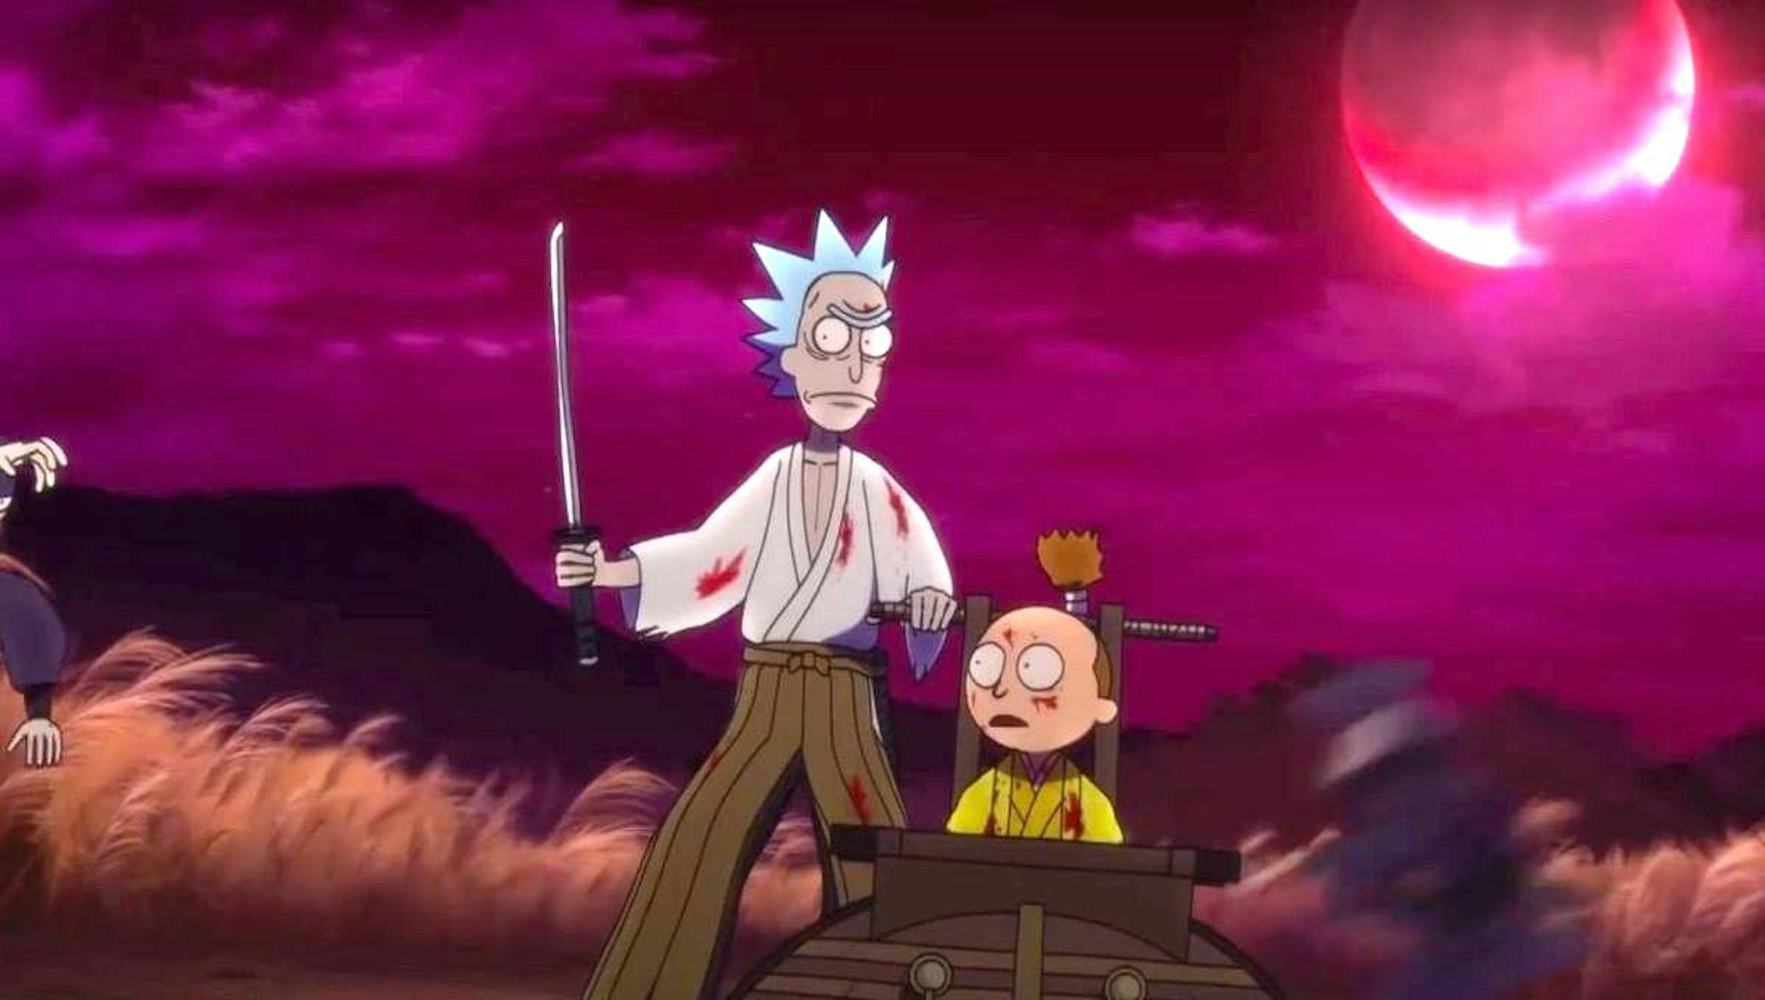 'Rick and Morty' Season 4 episode 6 release date may come April 1